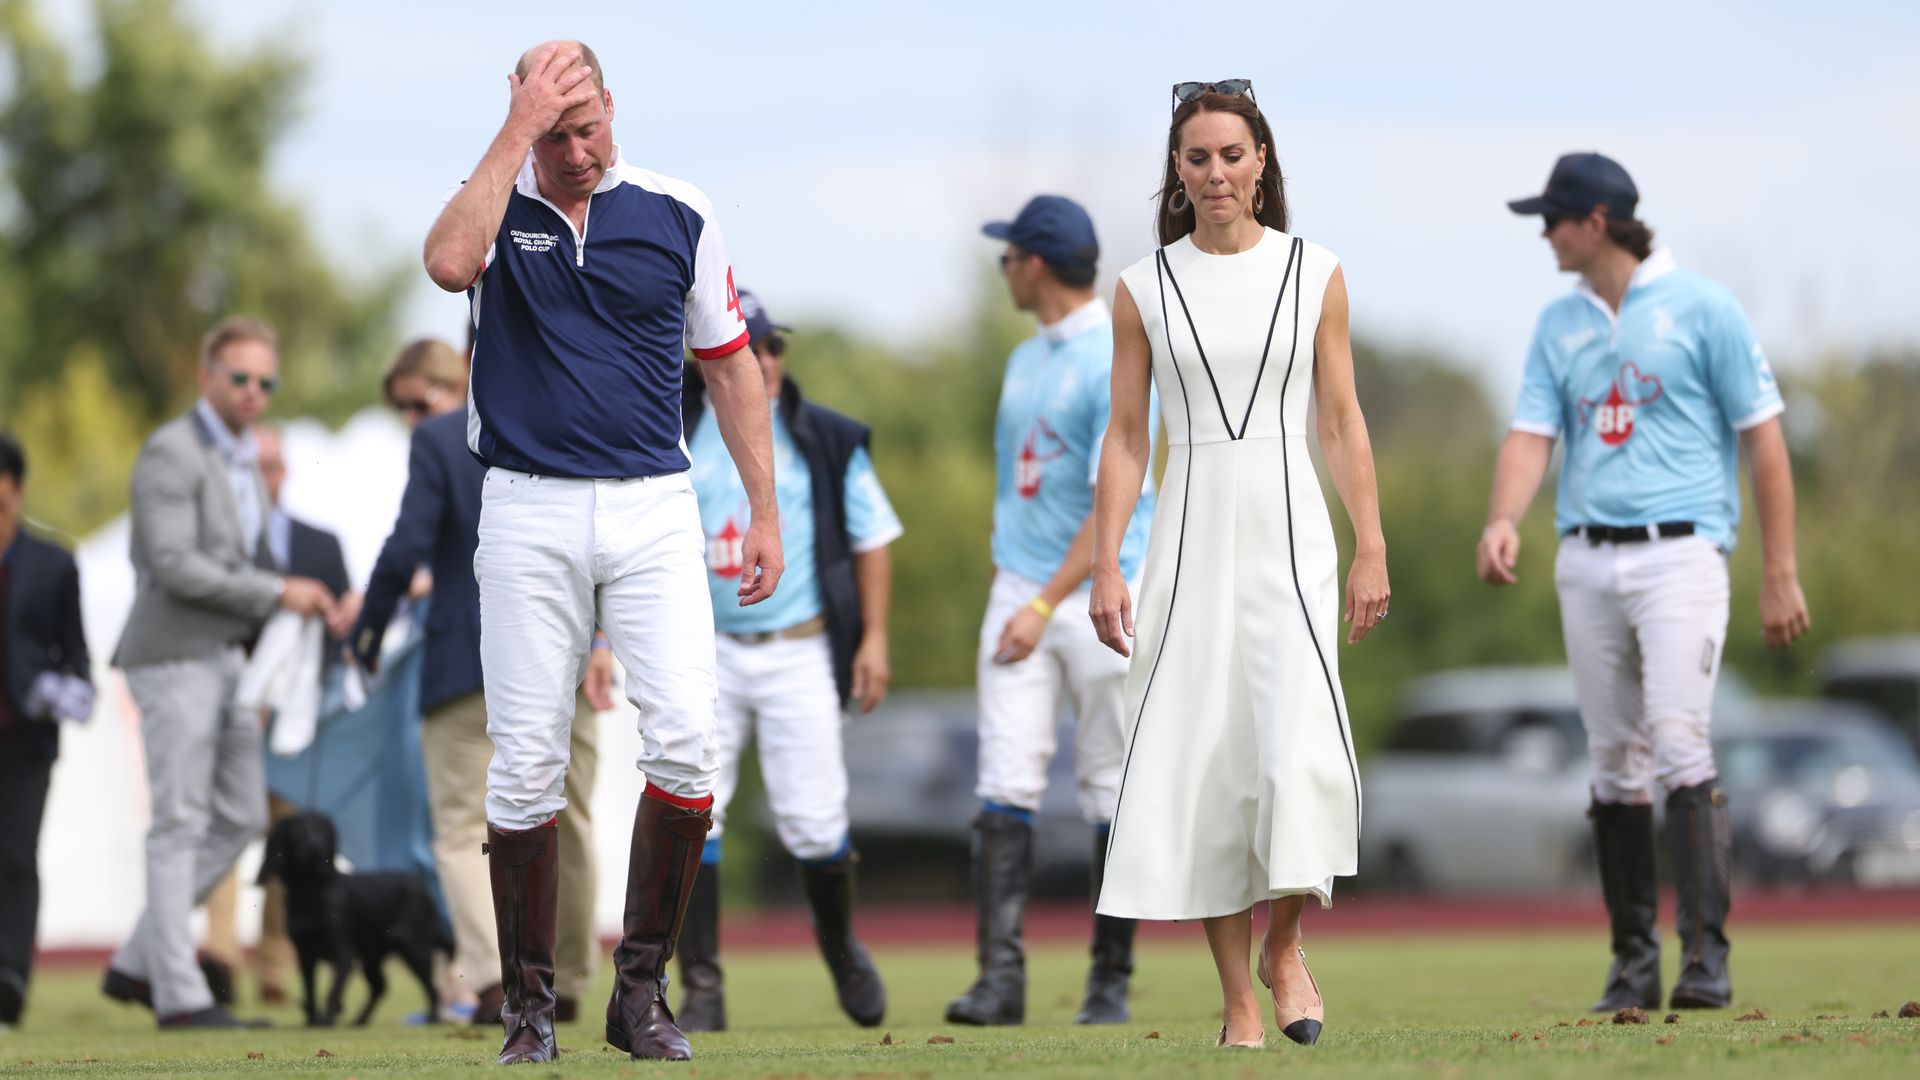 Kate middleton wears camilla elphick flats at the Out-Sourcing Inc charity polo match at Guards Polo Club, Smiths Lawn, Windsor. The match is to raise funds and awareness for ten charities supported by the Duke and Duchess of Cambridge. Picture date: Wedn